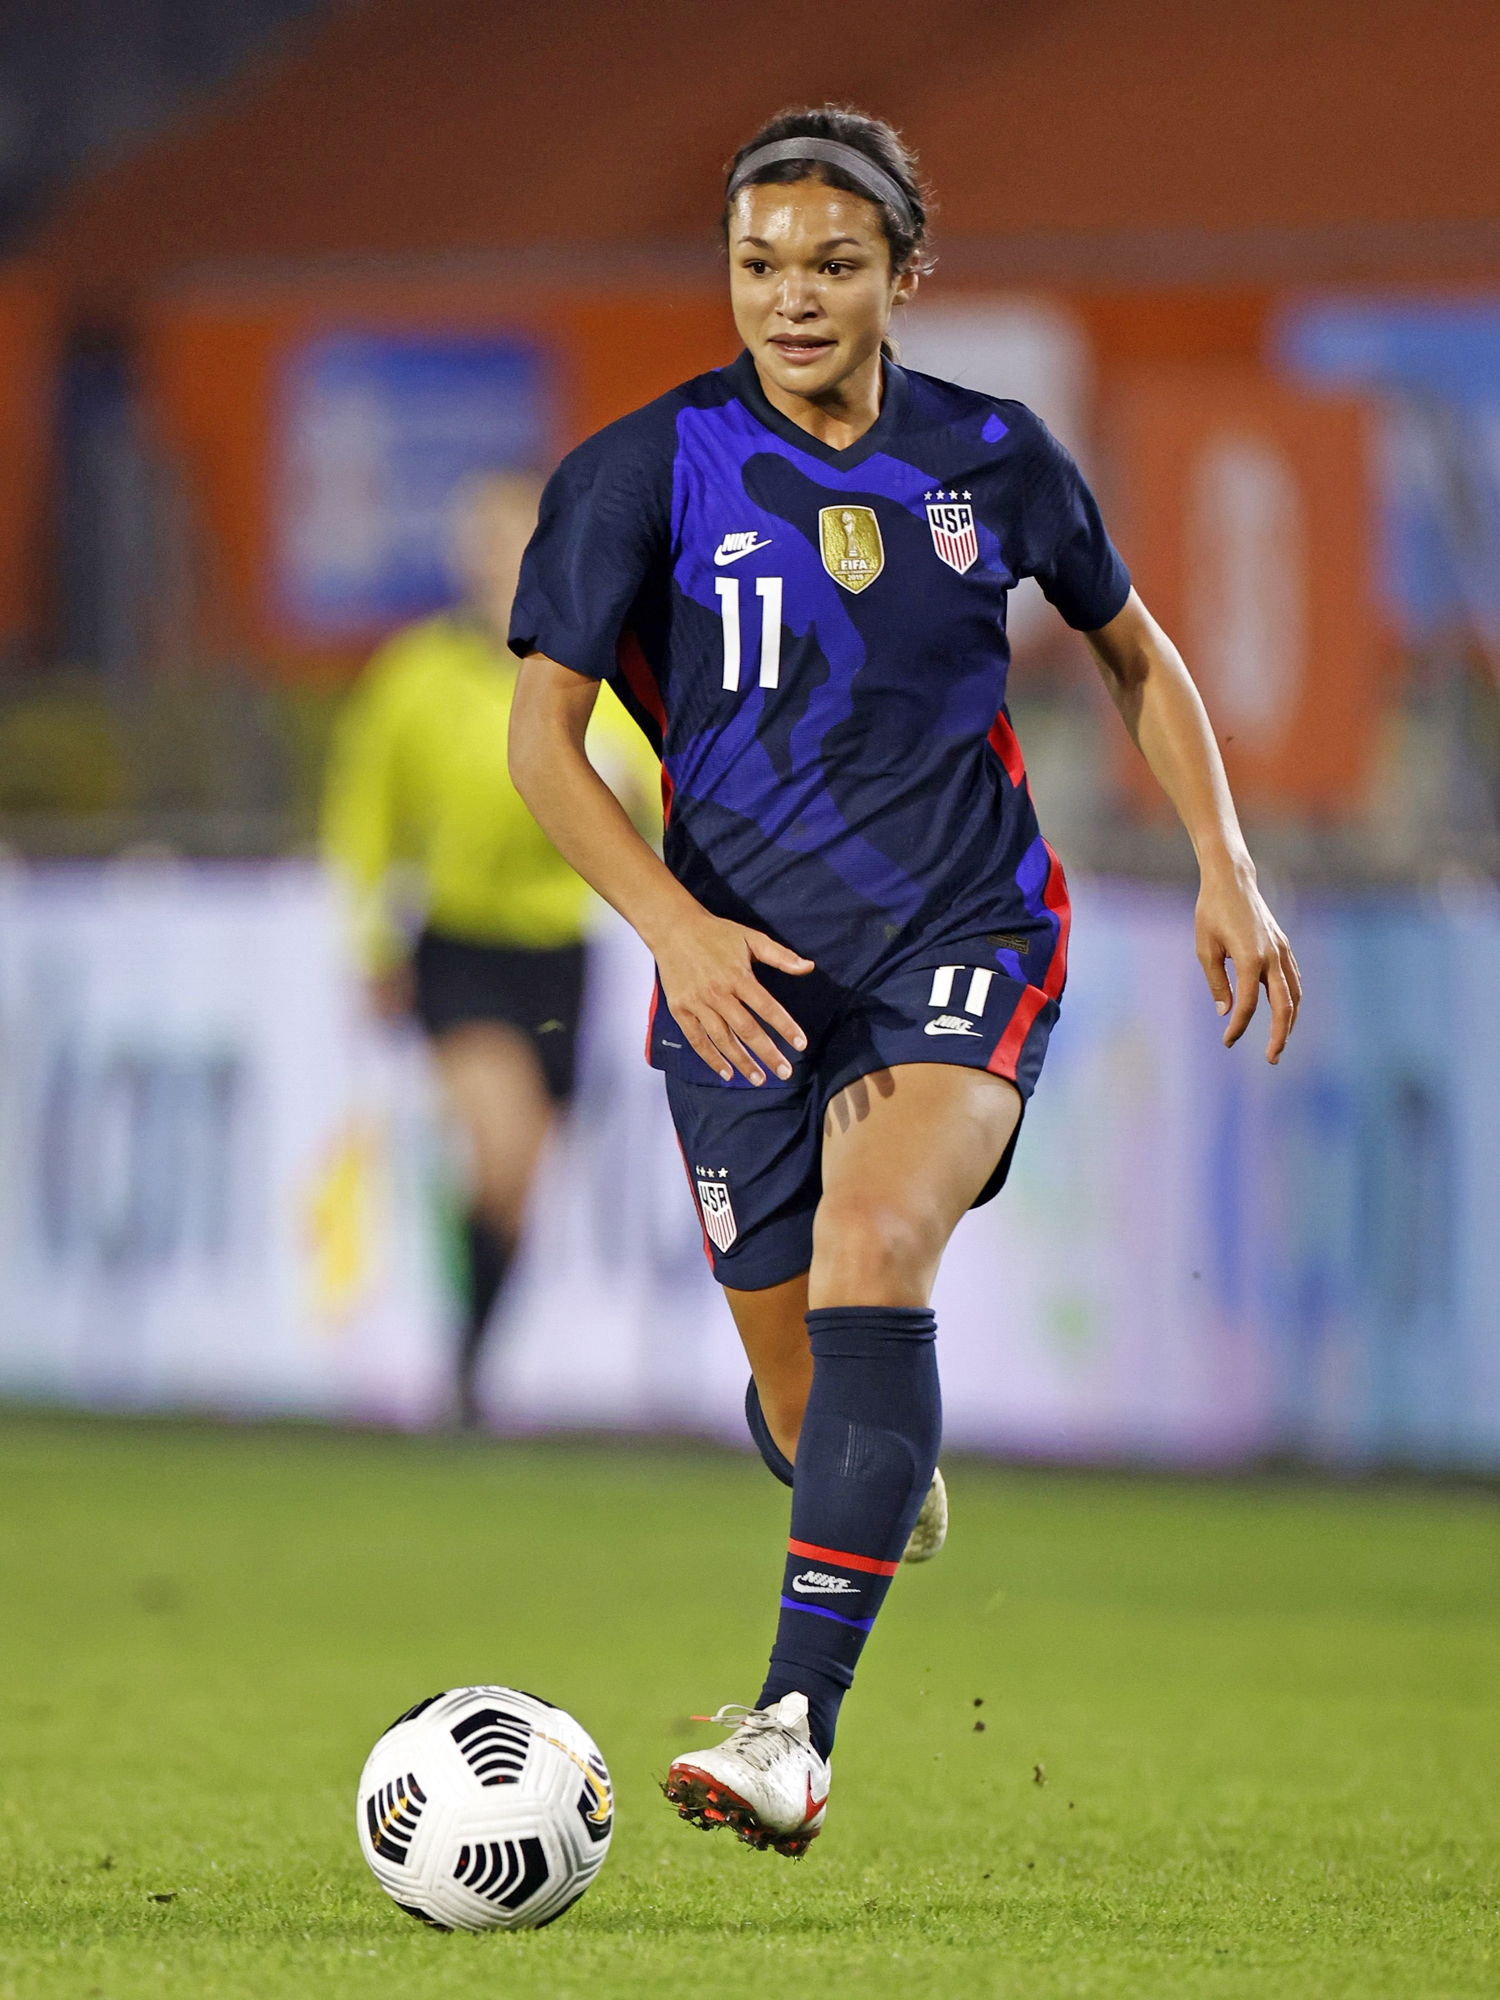 Meet Uswnt S Sophia Smith What To Know About The Star Soccer Player